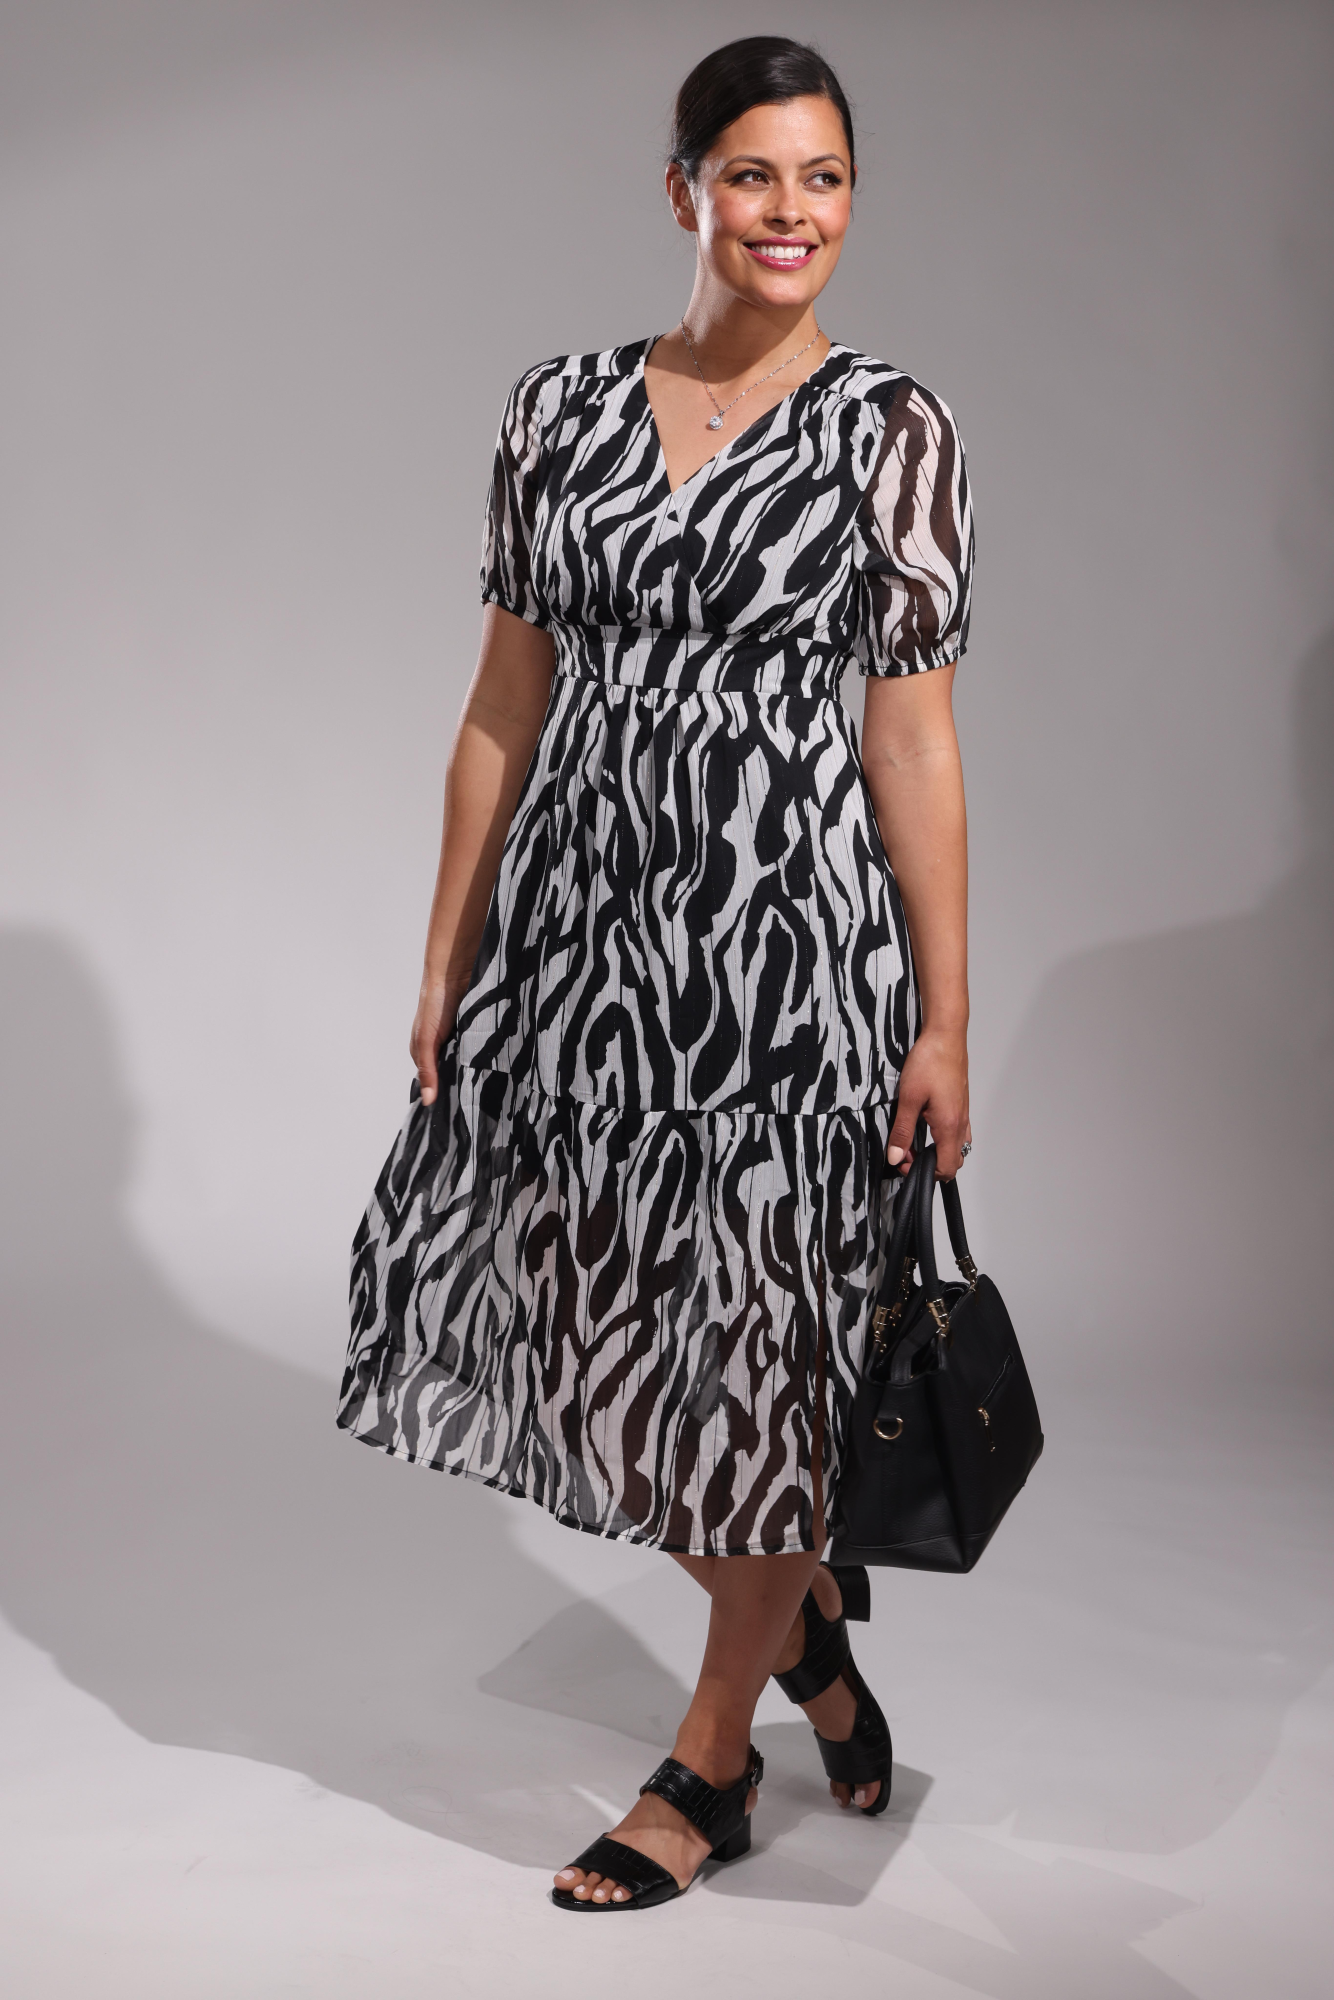 8555YY|BLK IVORY LUREX ABSTRACT